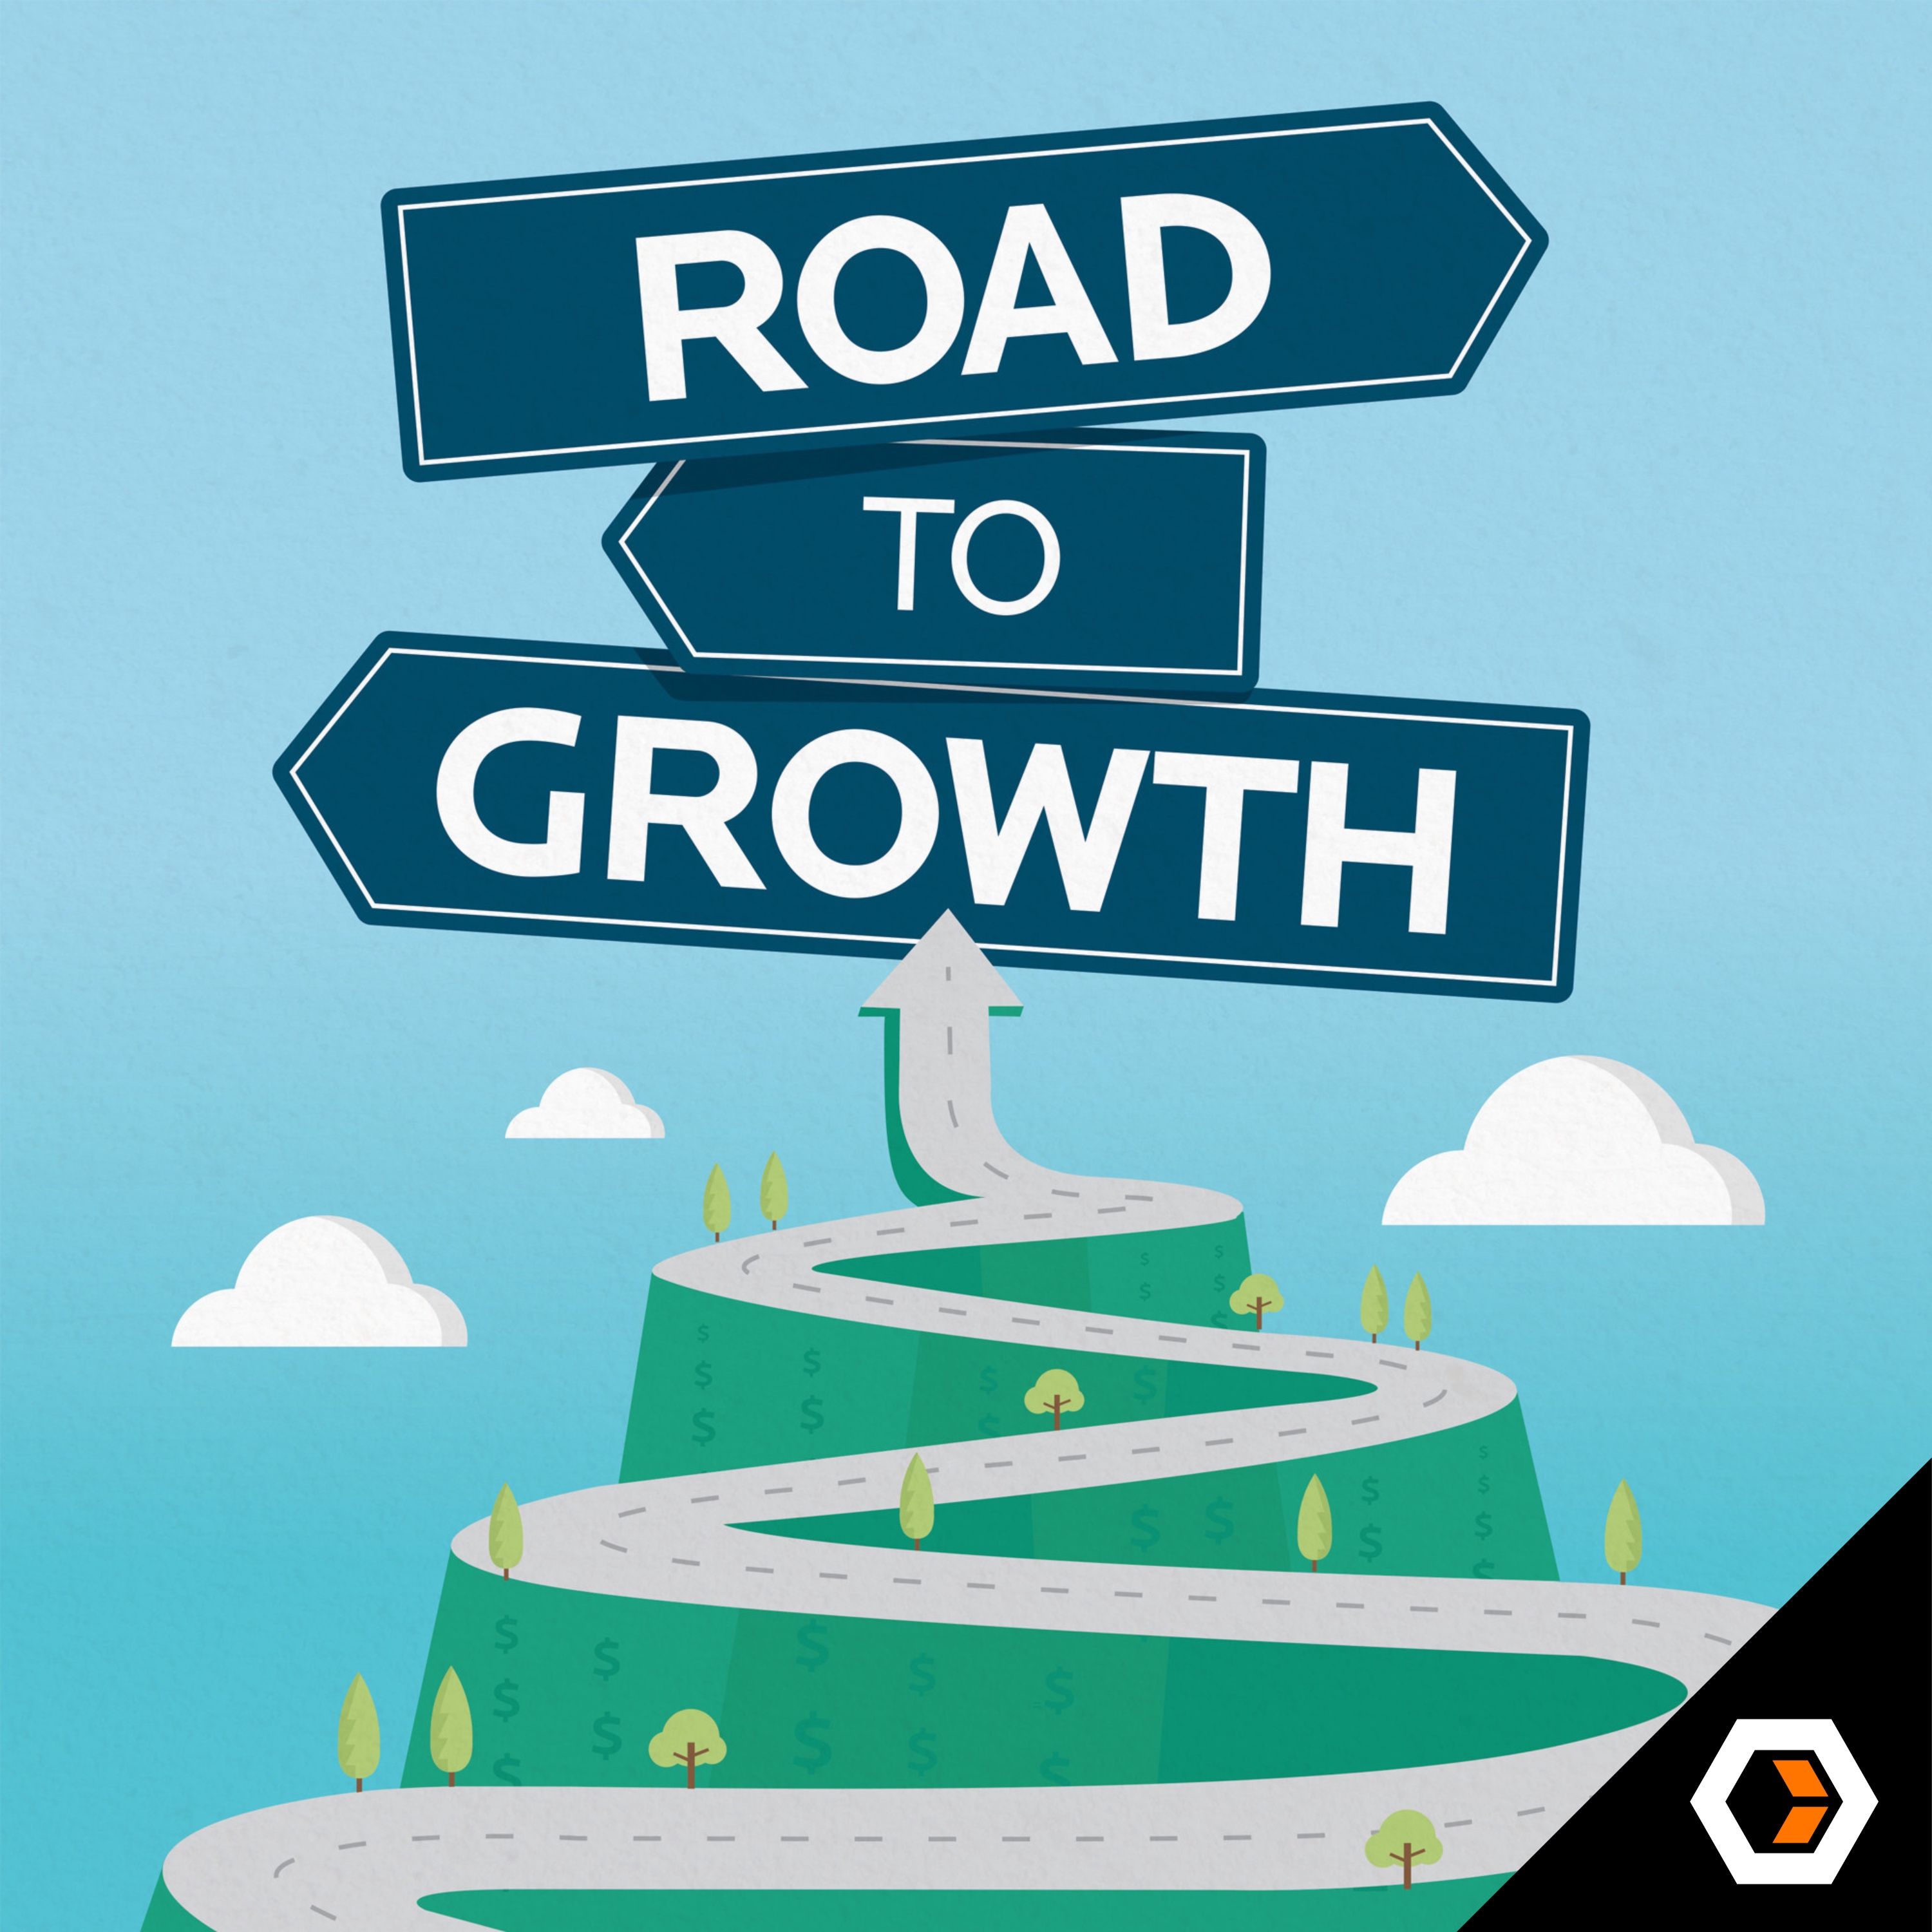 Road to Growth